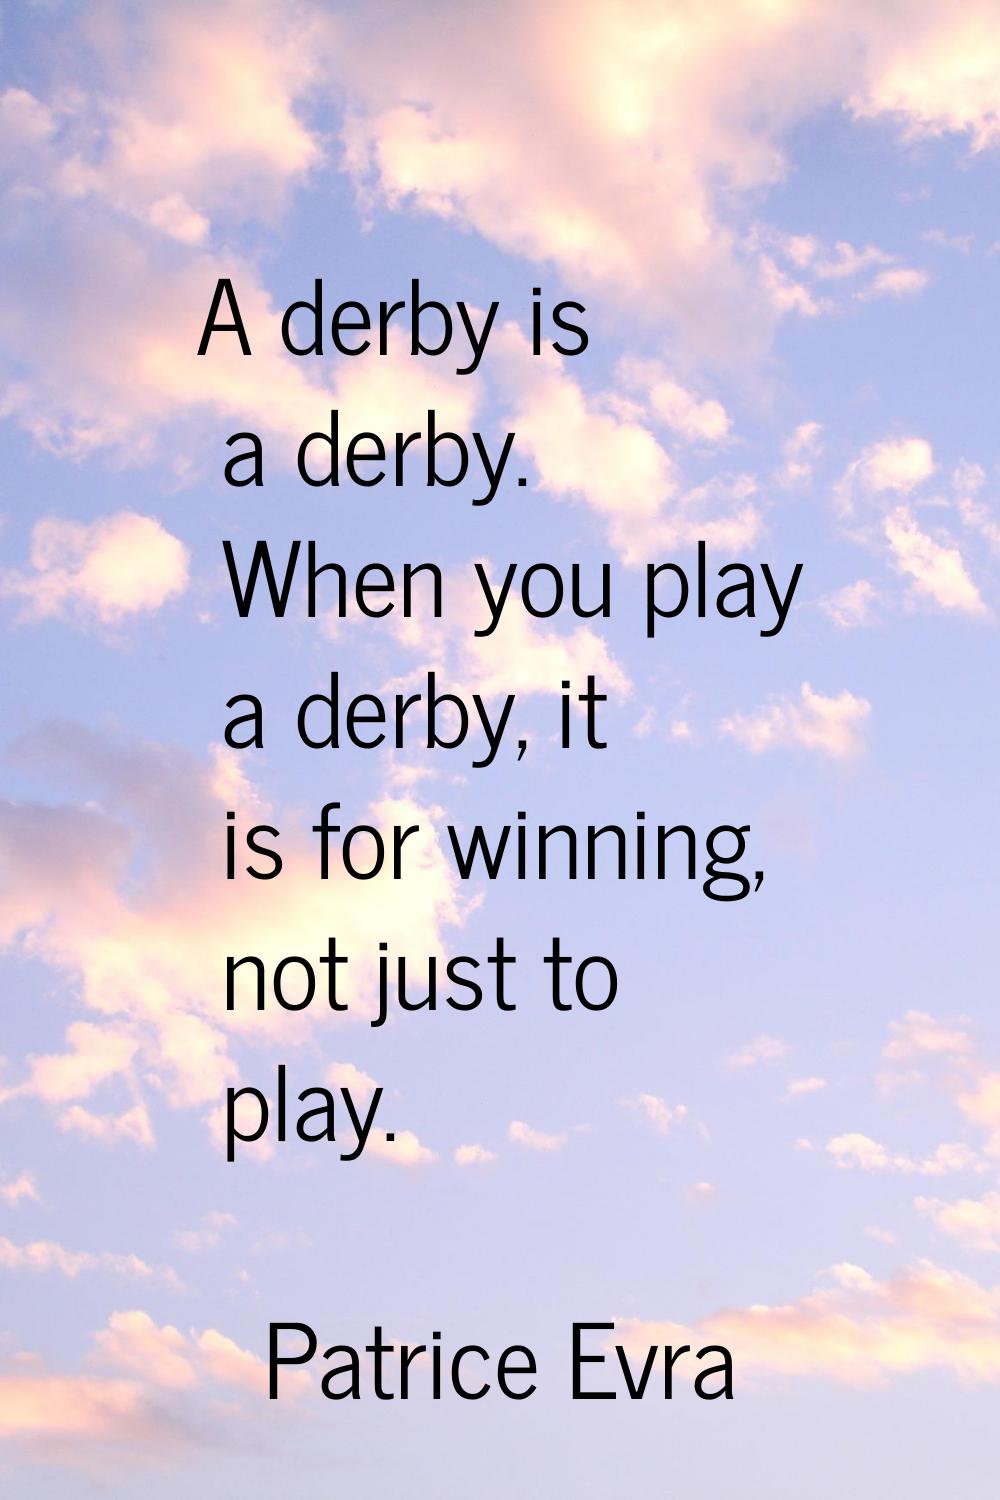 A derby is a derby. When you play a derby, it is for winning, not just to play.